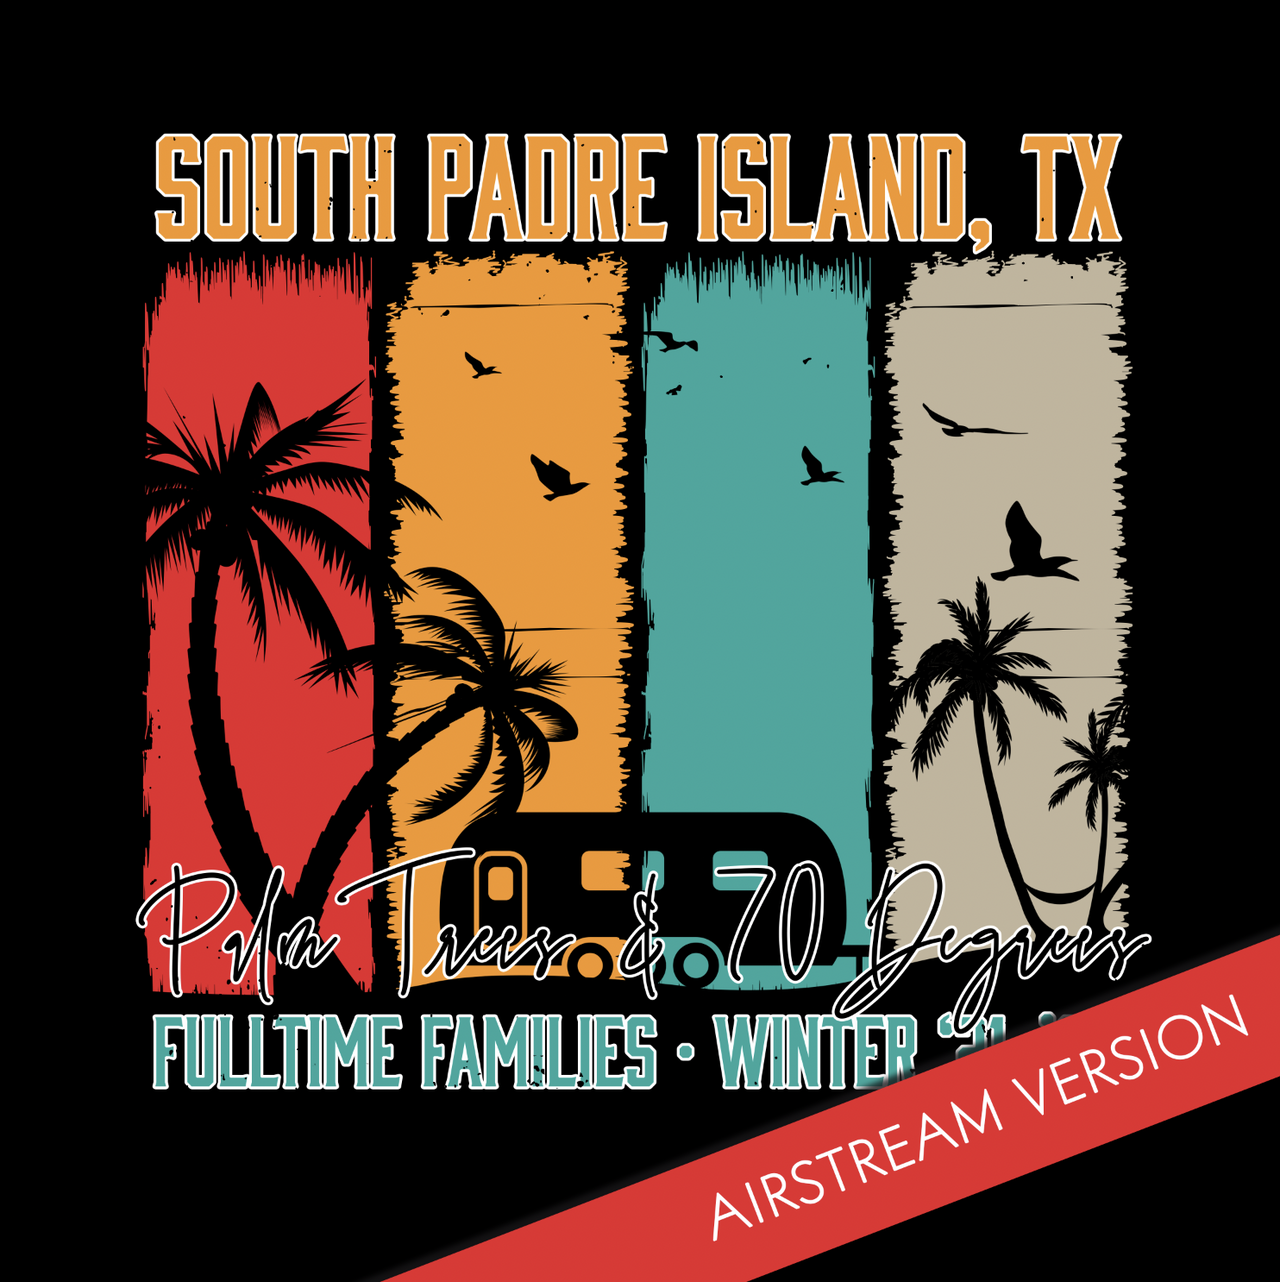 Fulltime Families South Padre Island Winter '21-'22 Limited Edition Shirt- Airstream Kids Shirt